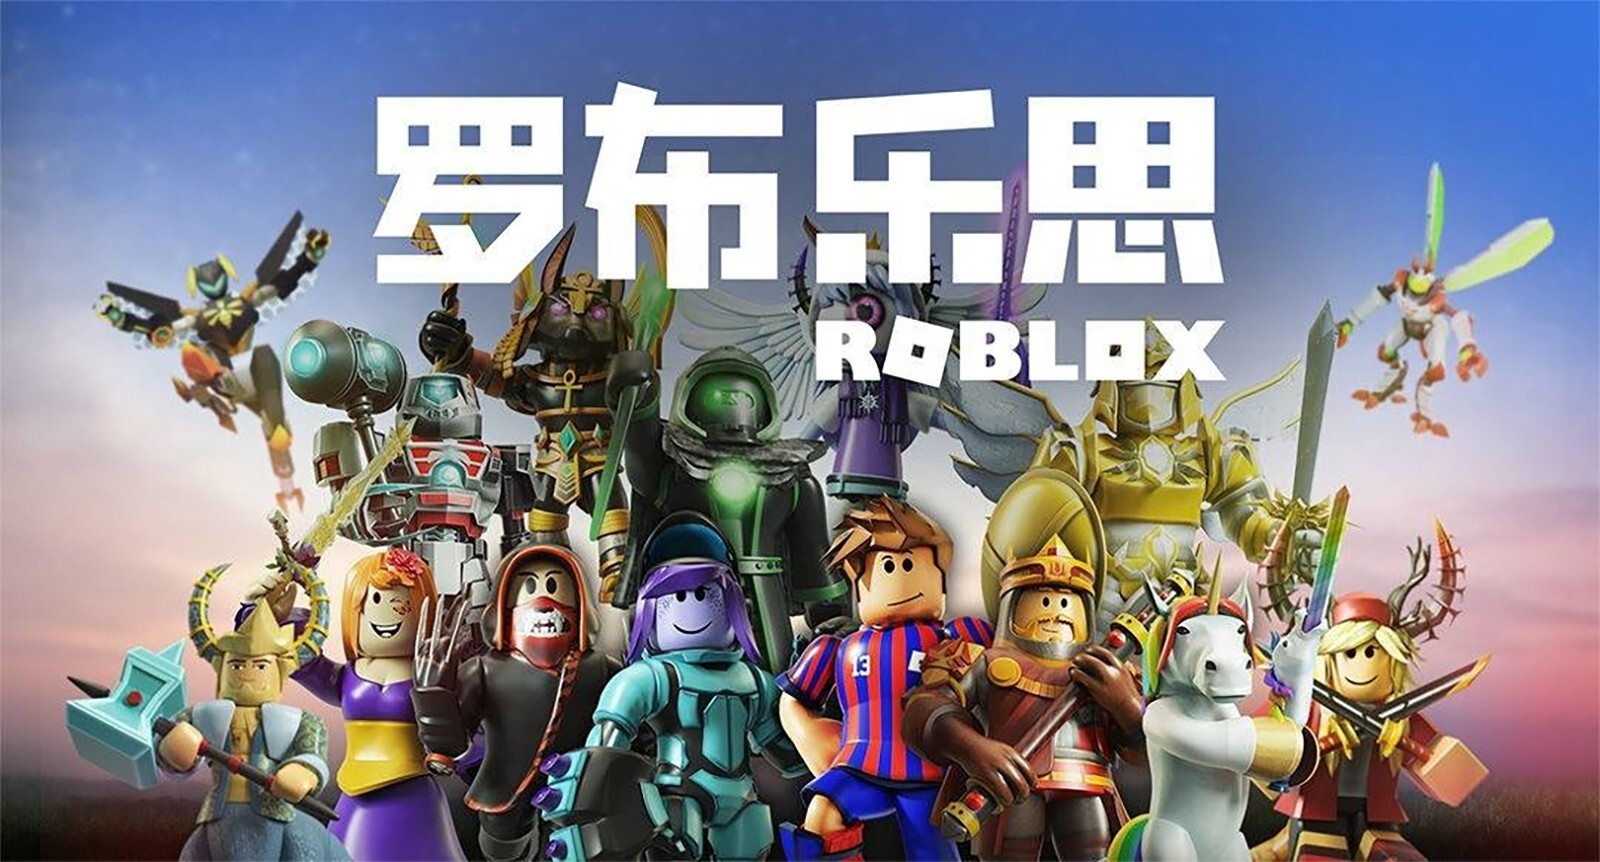 Gaming Firm Roblox Said To Delay Ipo As Instalment Loan Company Affirm Also Weighs Market Timing South China Morning Post - games in roblox published this year